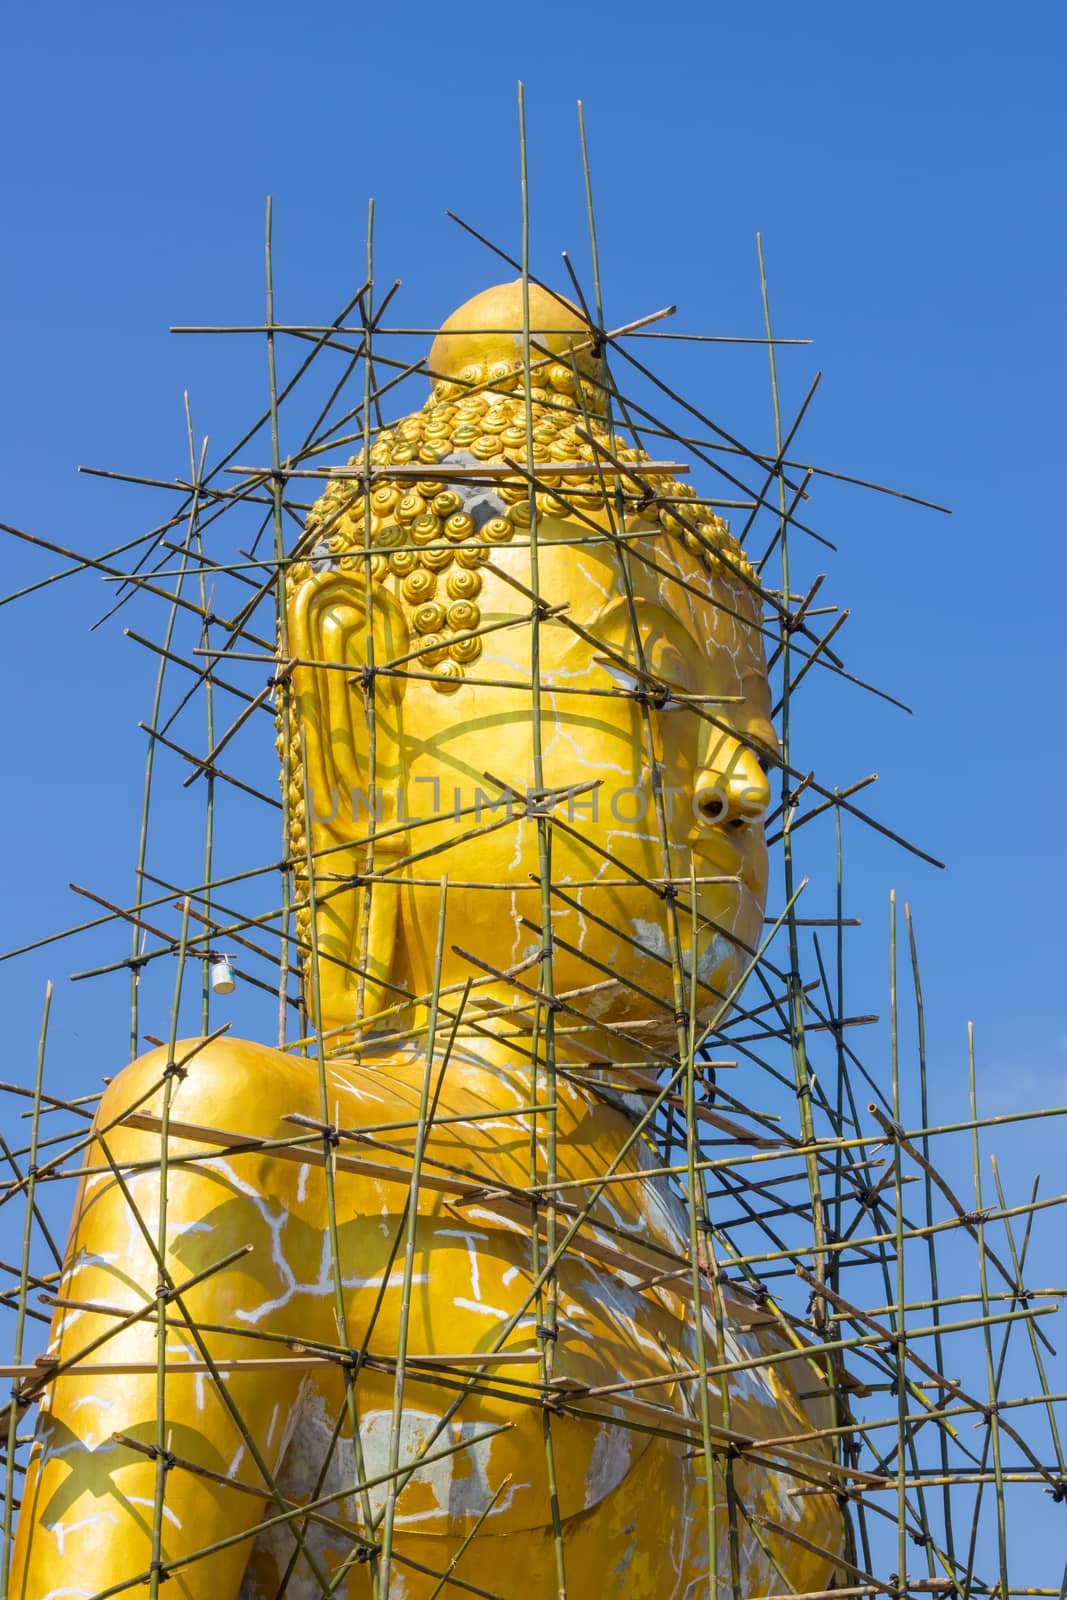 Buddha image reparation on the blue sky.